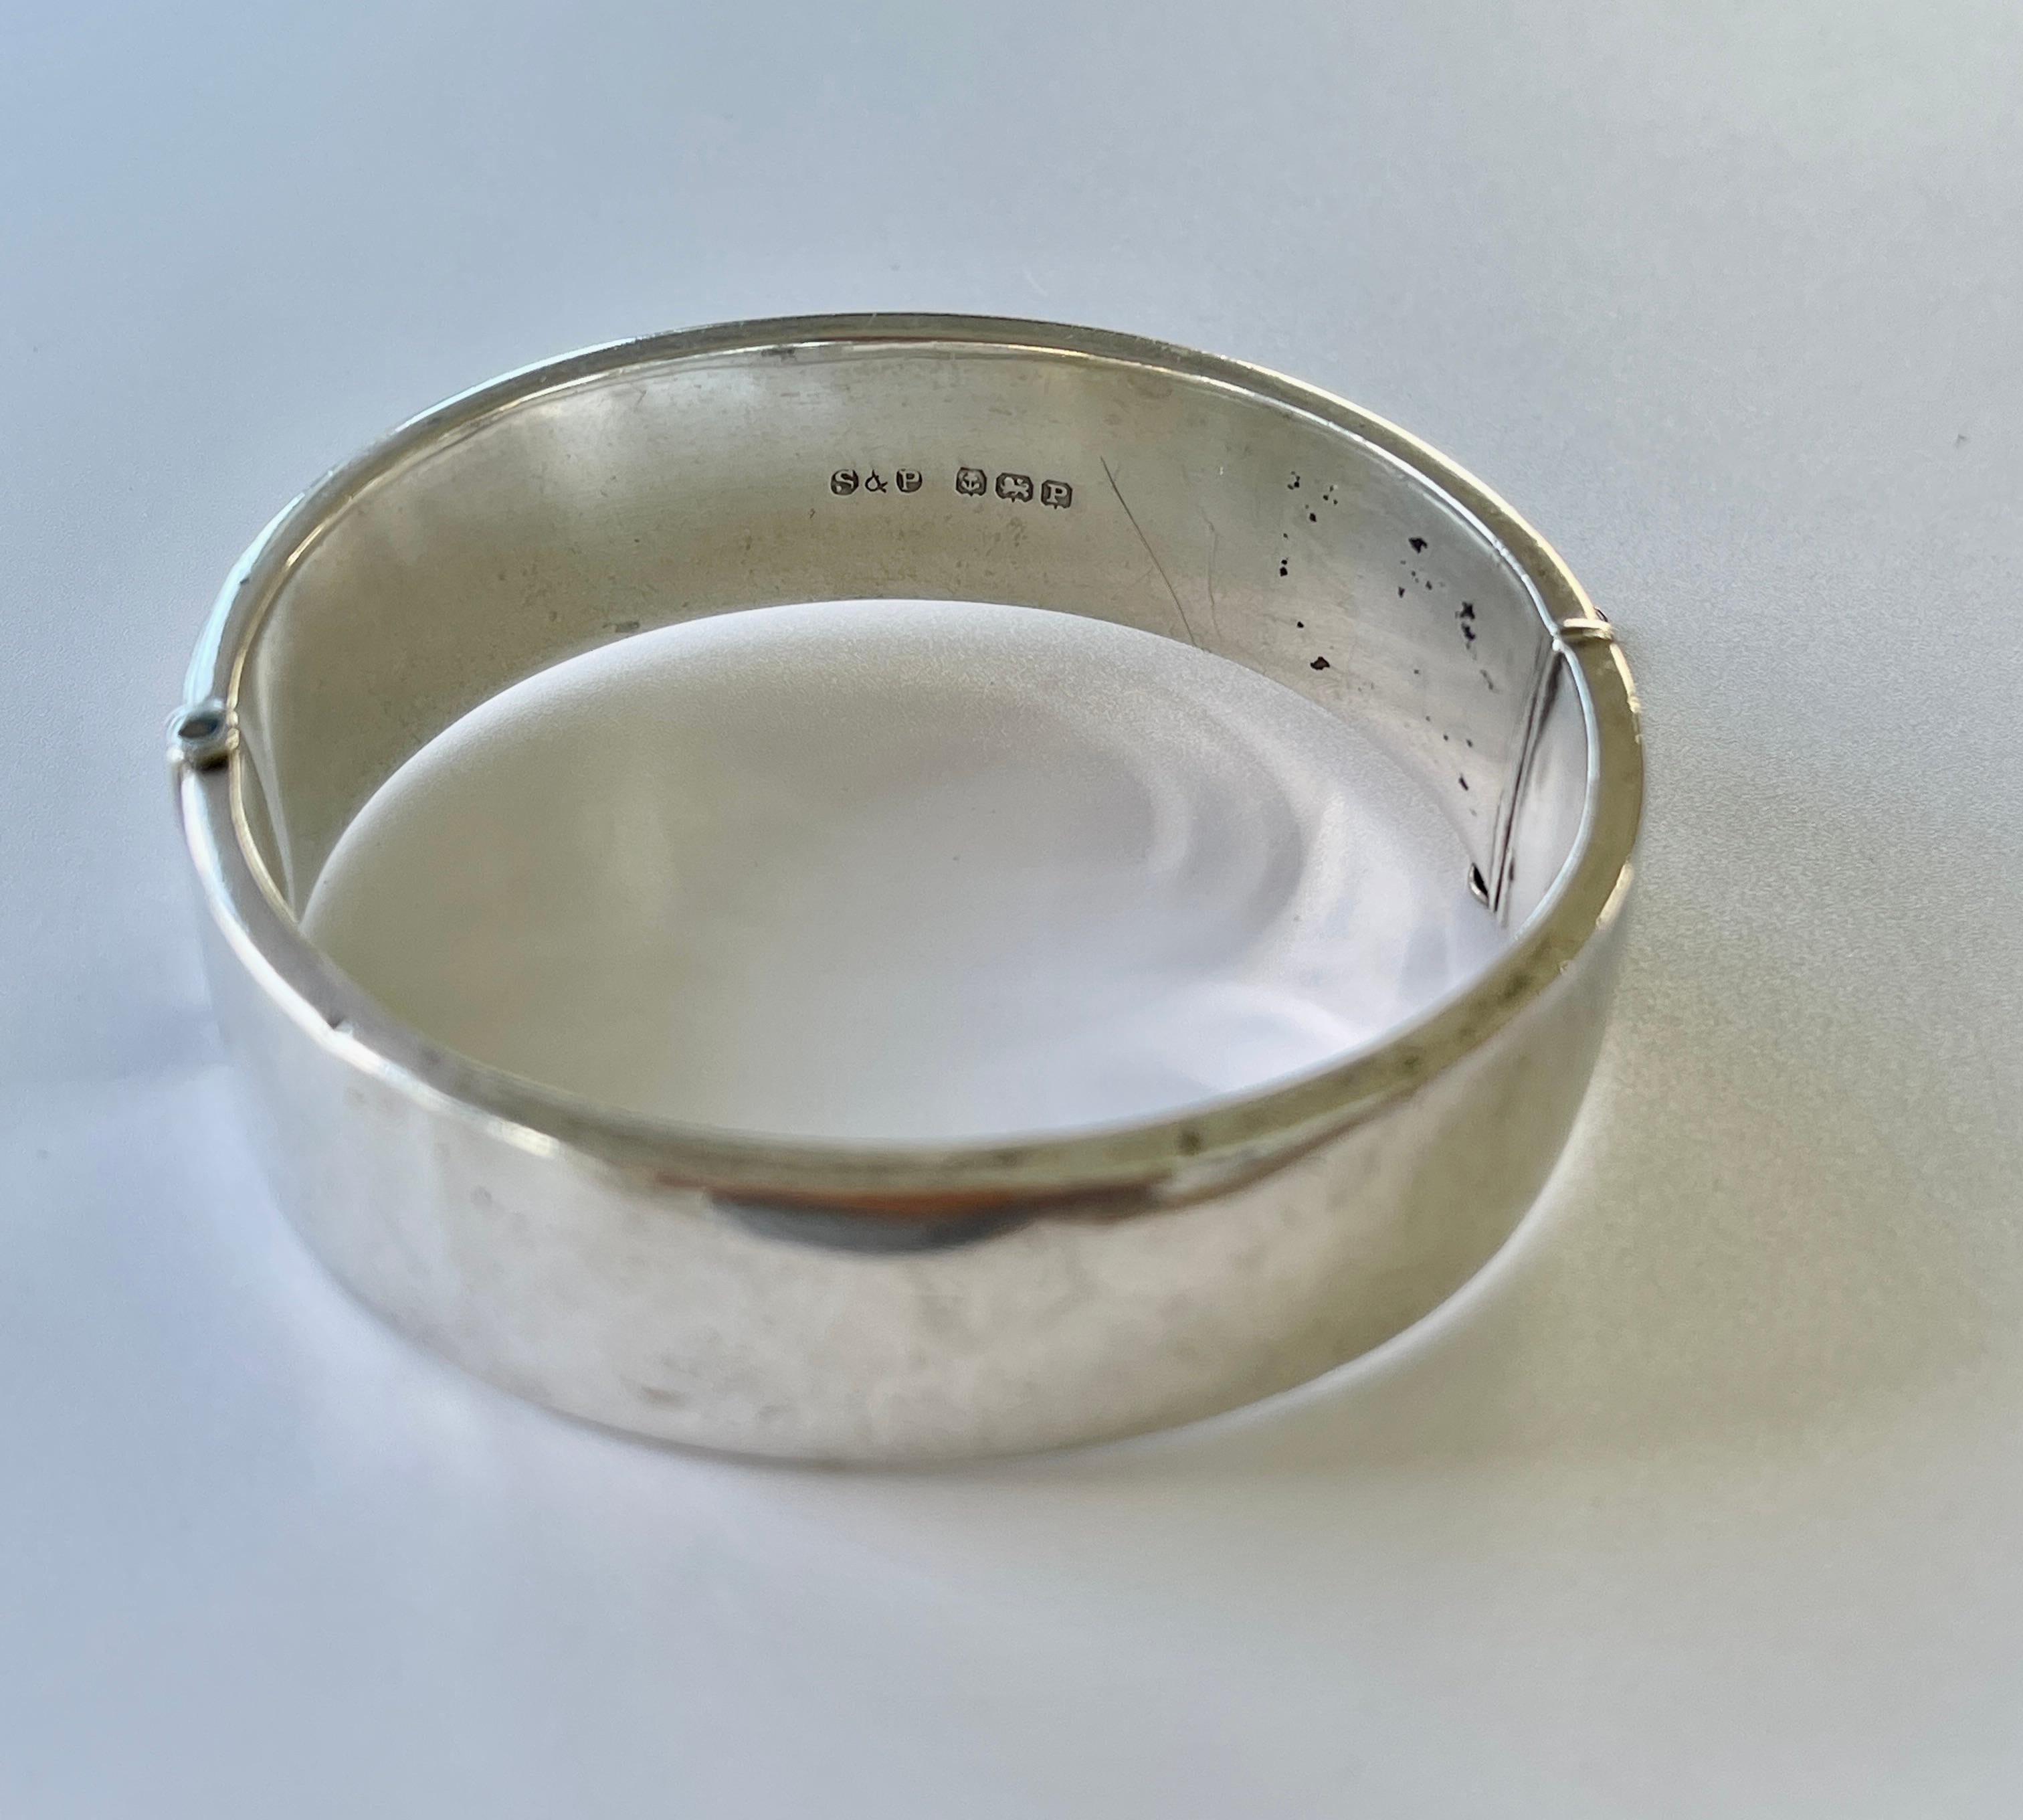 This beautiful bangle is WWII vintage era.

It is crafted in solid sterling silver and features hand engraved flower design.  It was crafted in Birmingham in 1939, the very year that WWII began.  Perhaps it was from a soldier about to leave for